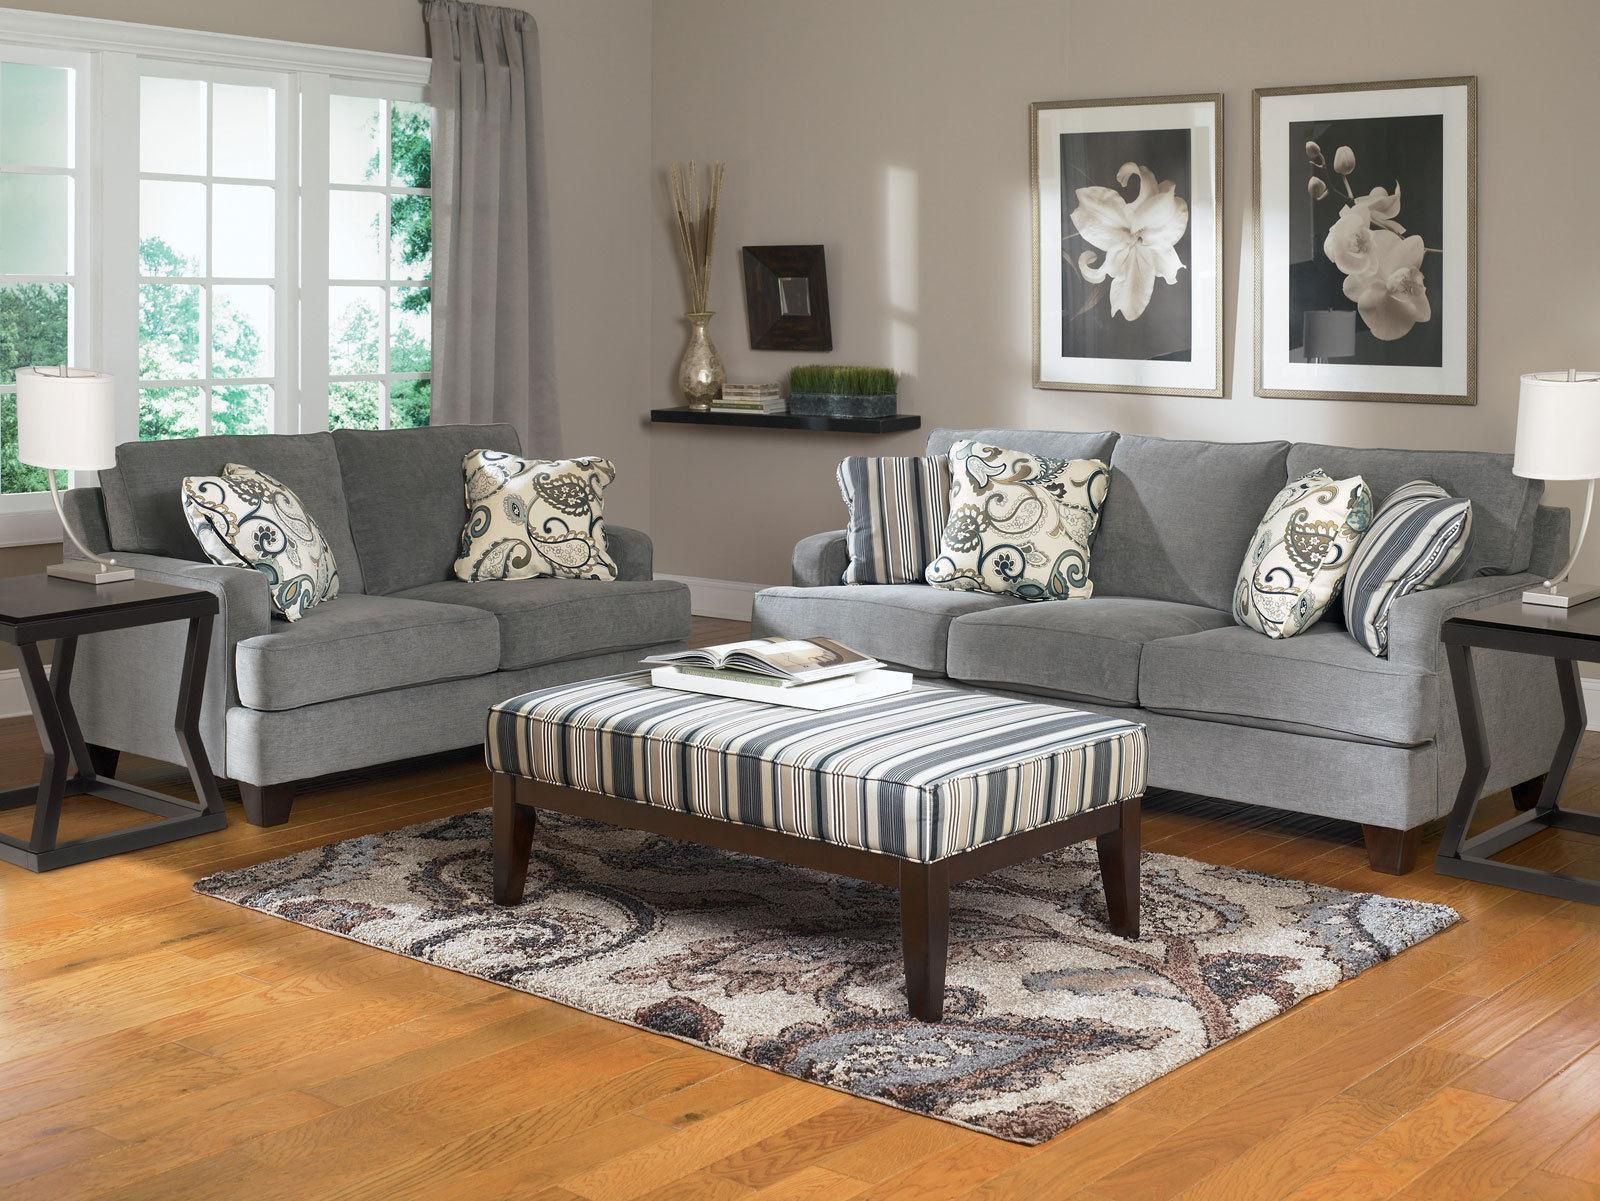 Christie Modern Living Room Furniture Set Gray Microfiber Sofa Couch With Regard To Sofas For Living Rooms (View 17 of 20)